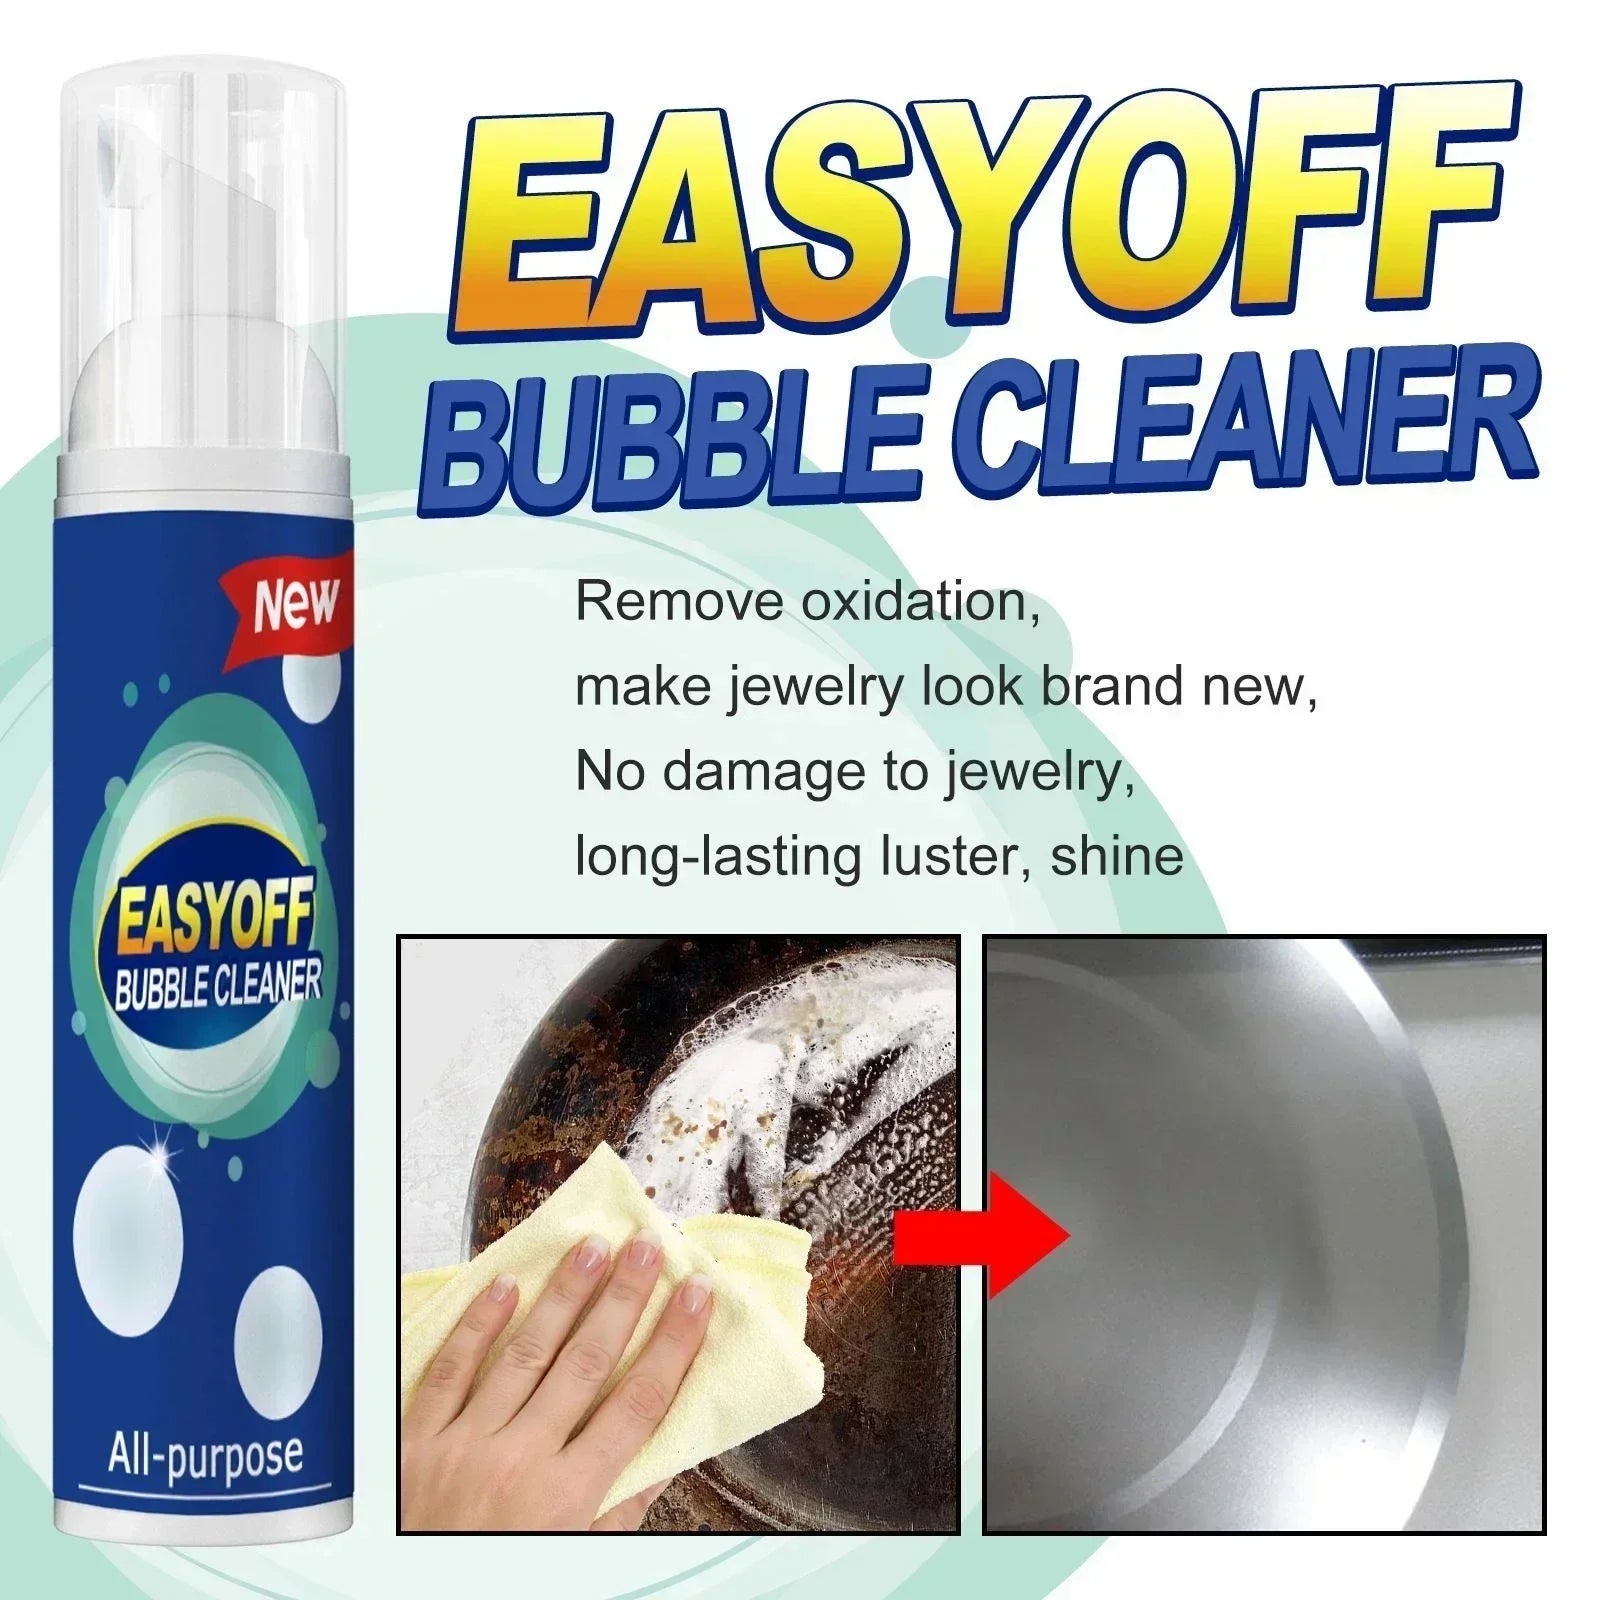 Fast-Acting Kitchen and Office Bubble Cleaner for Greasy Dirt on Couches & Desks. Ultra Foam Blast: Rinse-Free Heavy Oil & Rust Remover